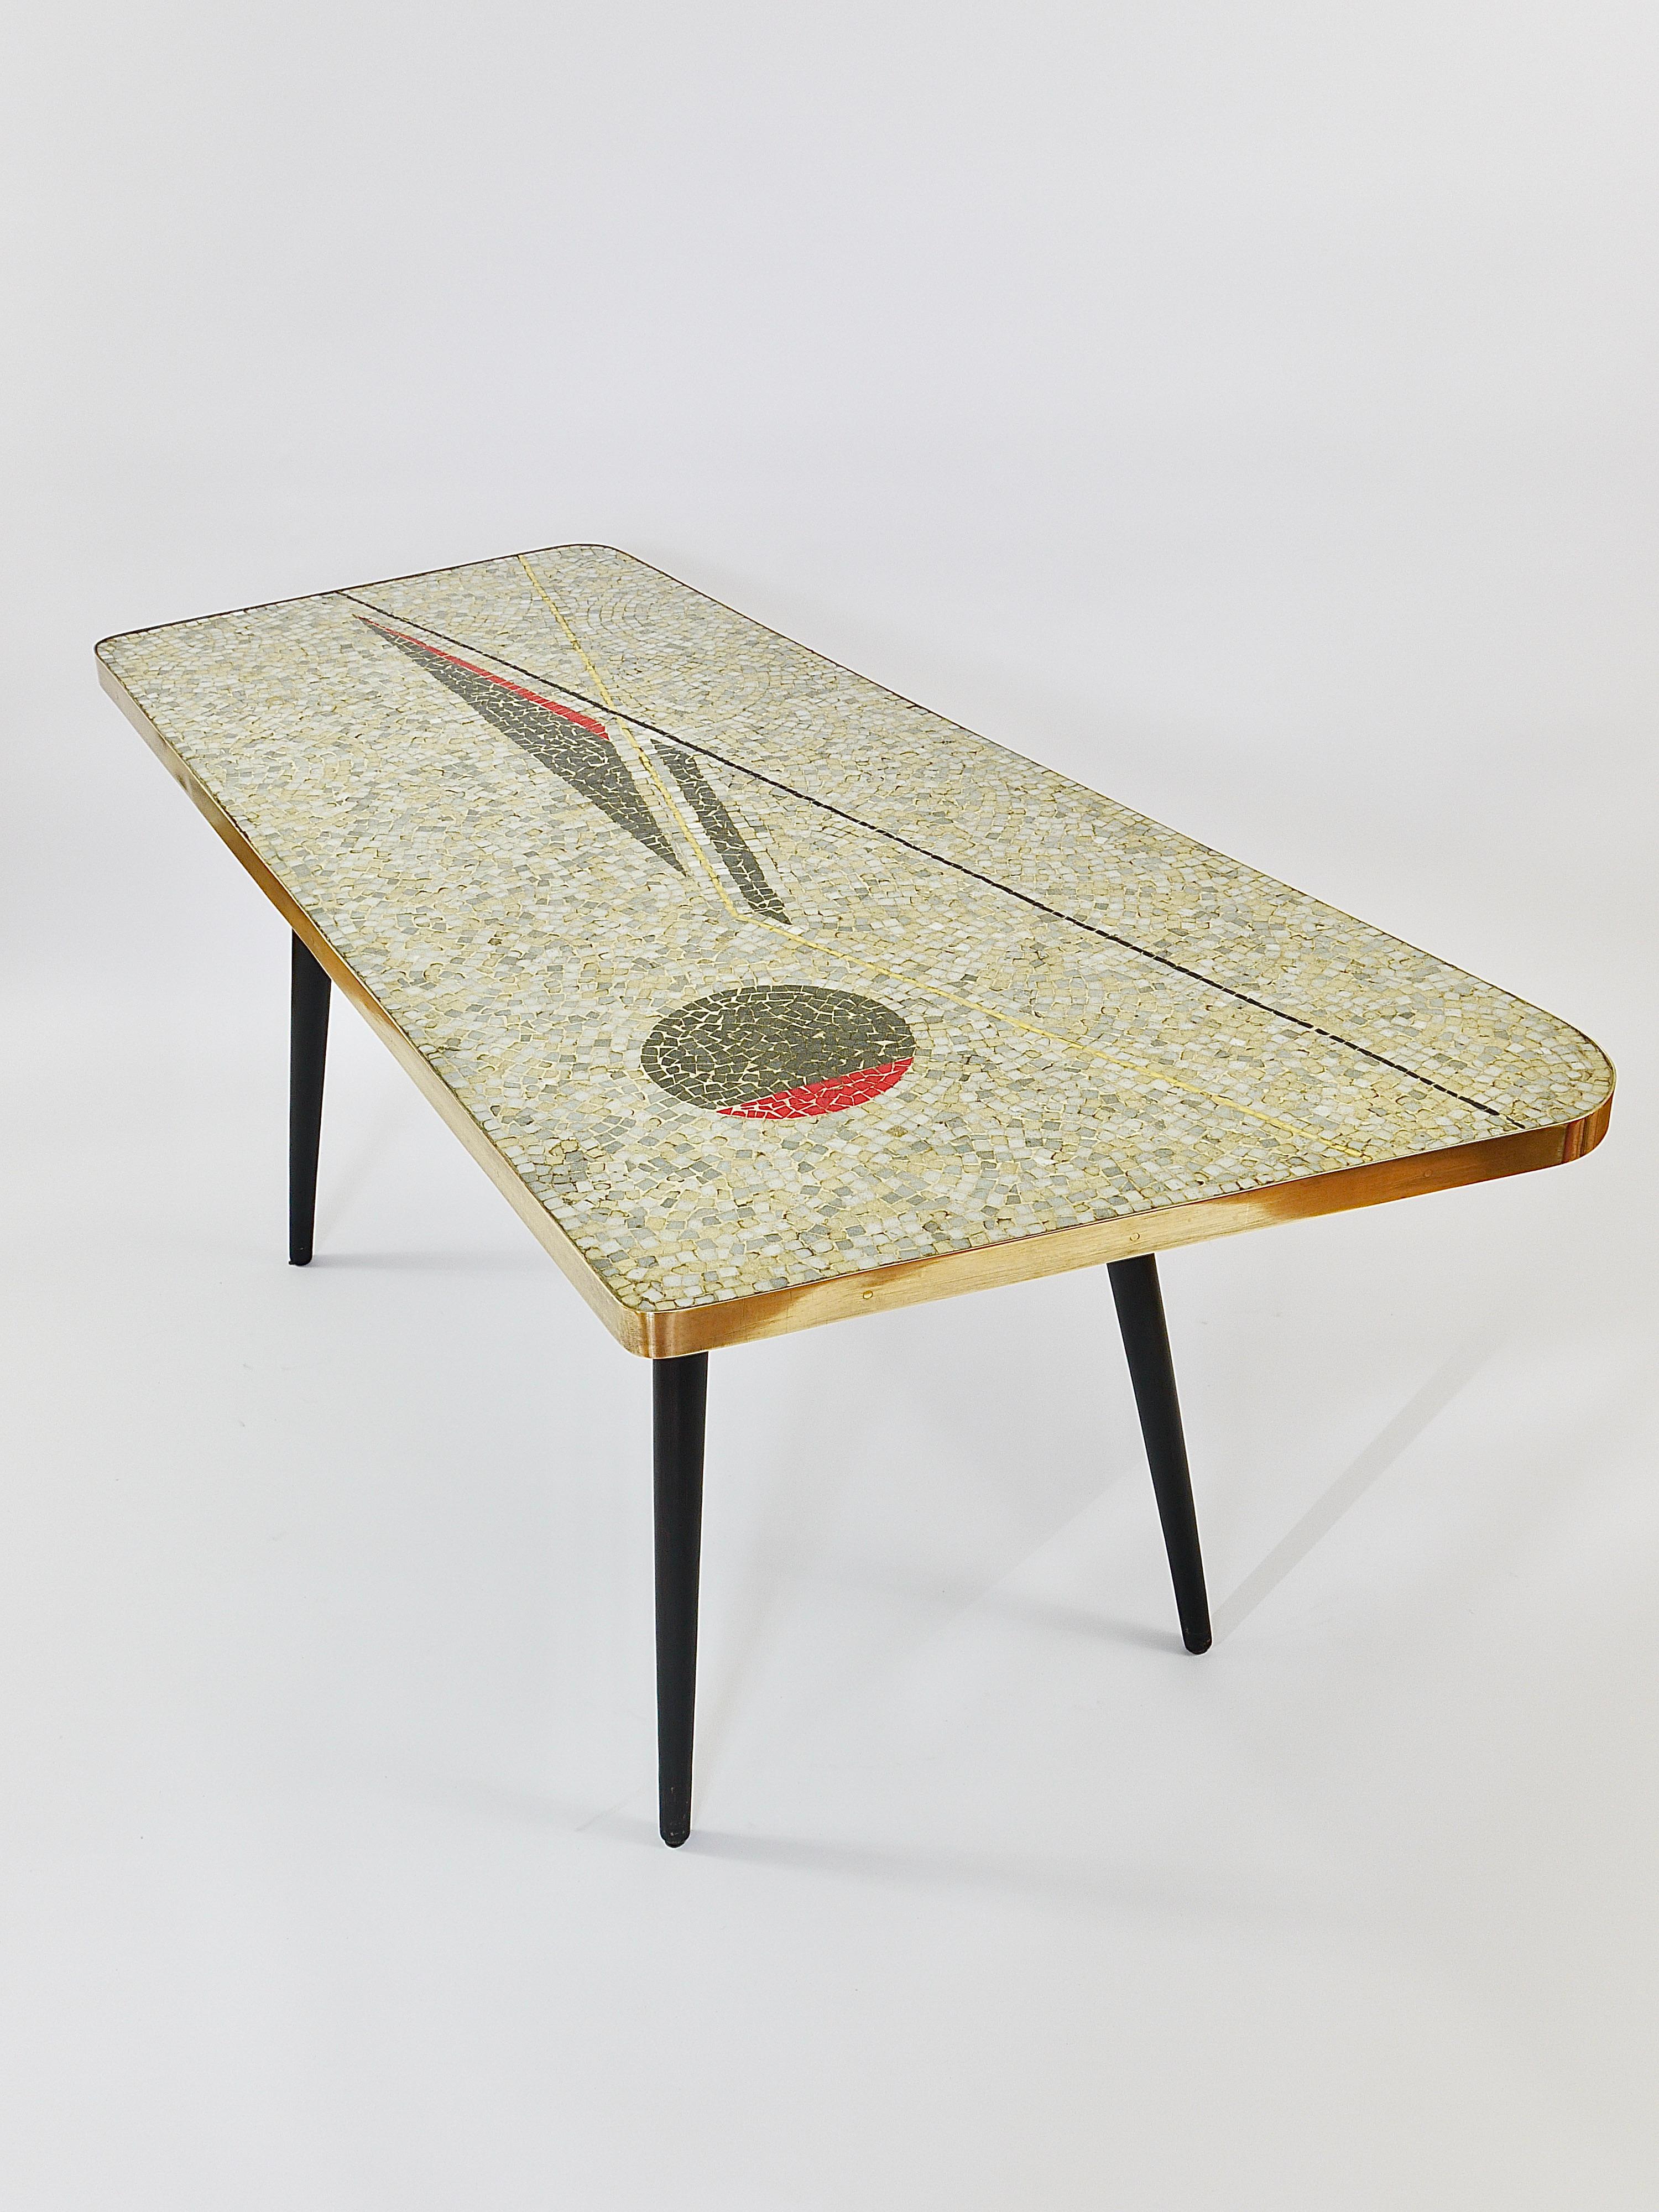 Bentwood Berthold Muller Asymmetrical Mosaic Tile Coffee or Sofa Table, Germany, 1950s For Sale